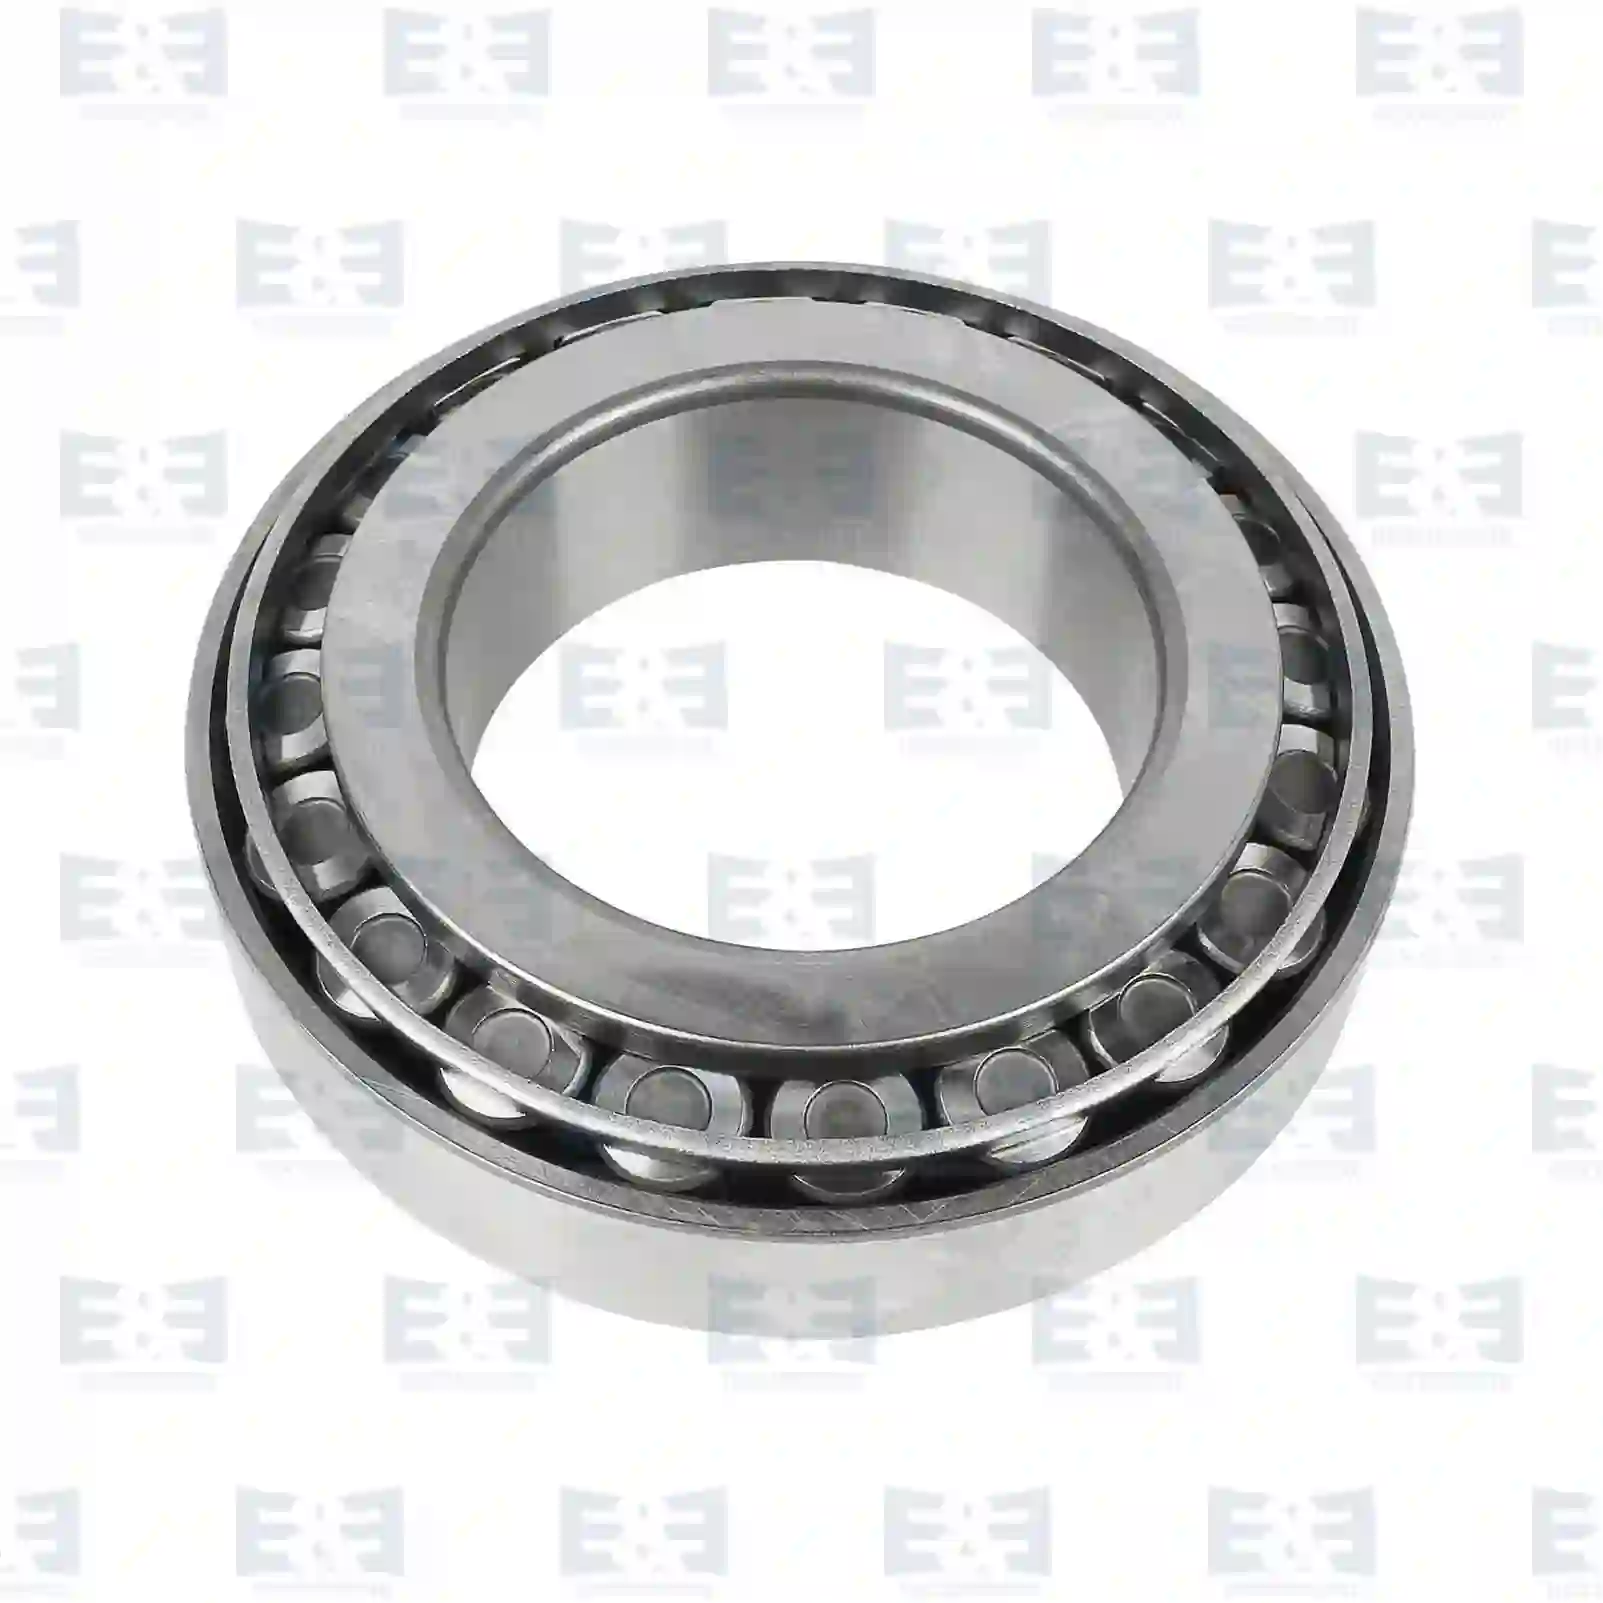 Tapered roller bearing, 2E2284781, 21040T, 07164544, 26800230, 988485104, 988485104A, 00914219, 01102862, 01905354, 07164544, 1905354, 26800230, 3612948500, 06324901600, 06324990007, 34934200004, 64934200101, 87523301210, 0009812205, 0029811705, 0029811805, 3279810405, 3279812205, MS556521, 40209-90000, 0023432217, 0959232217, 5000020511, 7401524857, 4200002500, 8064032217, 14146, EN568103, 97600-32217, 1524857, ZG03008-0008 ||  2E2284781 E&E Truck Spare Parts | Truck Spare Parts, Auotomotive Spare Parts Tapered roller bearing, 2E2284781, 21040T, 07164544, 26800230, 988485104, 988485104A, 00914219, 01102862, 01905354, 07164544, 1905354, 26800230, 3612948500, 06324901600, 06324990007, 34934200004, 64934200101, 87523301210, 0009812205, 0029811705, 0029811805, 3279810405, 3279812205, MS556521, 40209-90000, 0023432217, 0959232217, 5000020511, 7401524857, 4200002500, 8064032217, 14146, EN568103, 97600-32217, 1524857, ZG03008-0008 ||  2E2284781 E&E Truck Spare Parts | Truck Spare Parts, Auotomotive Spare Parts